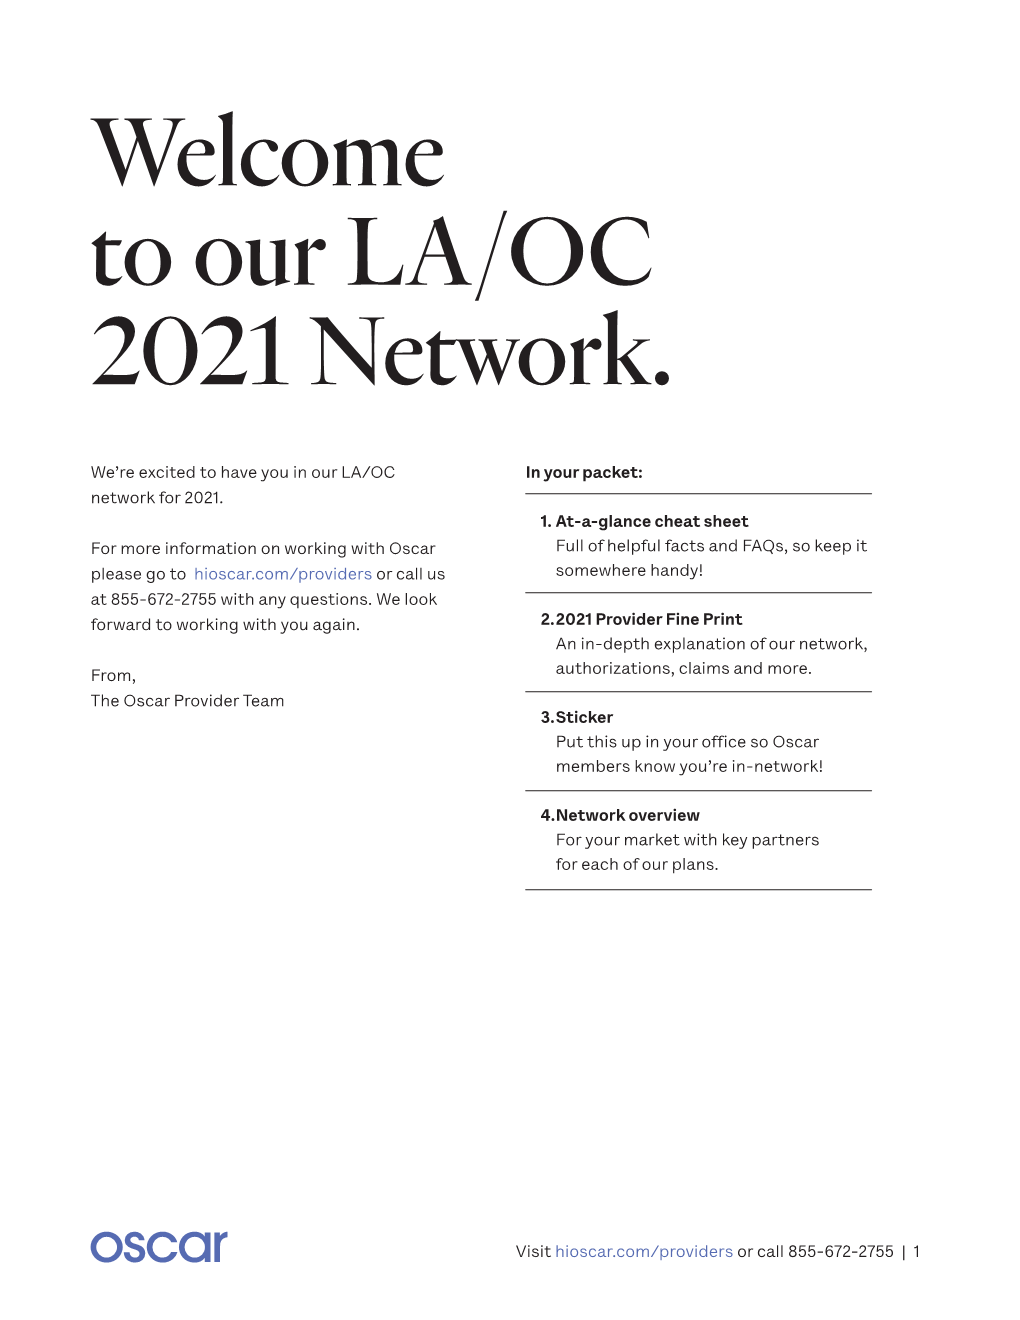 Welcome to Our LA/ OC 2021 Network